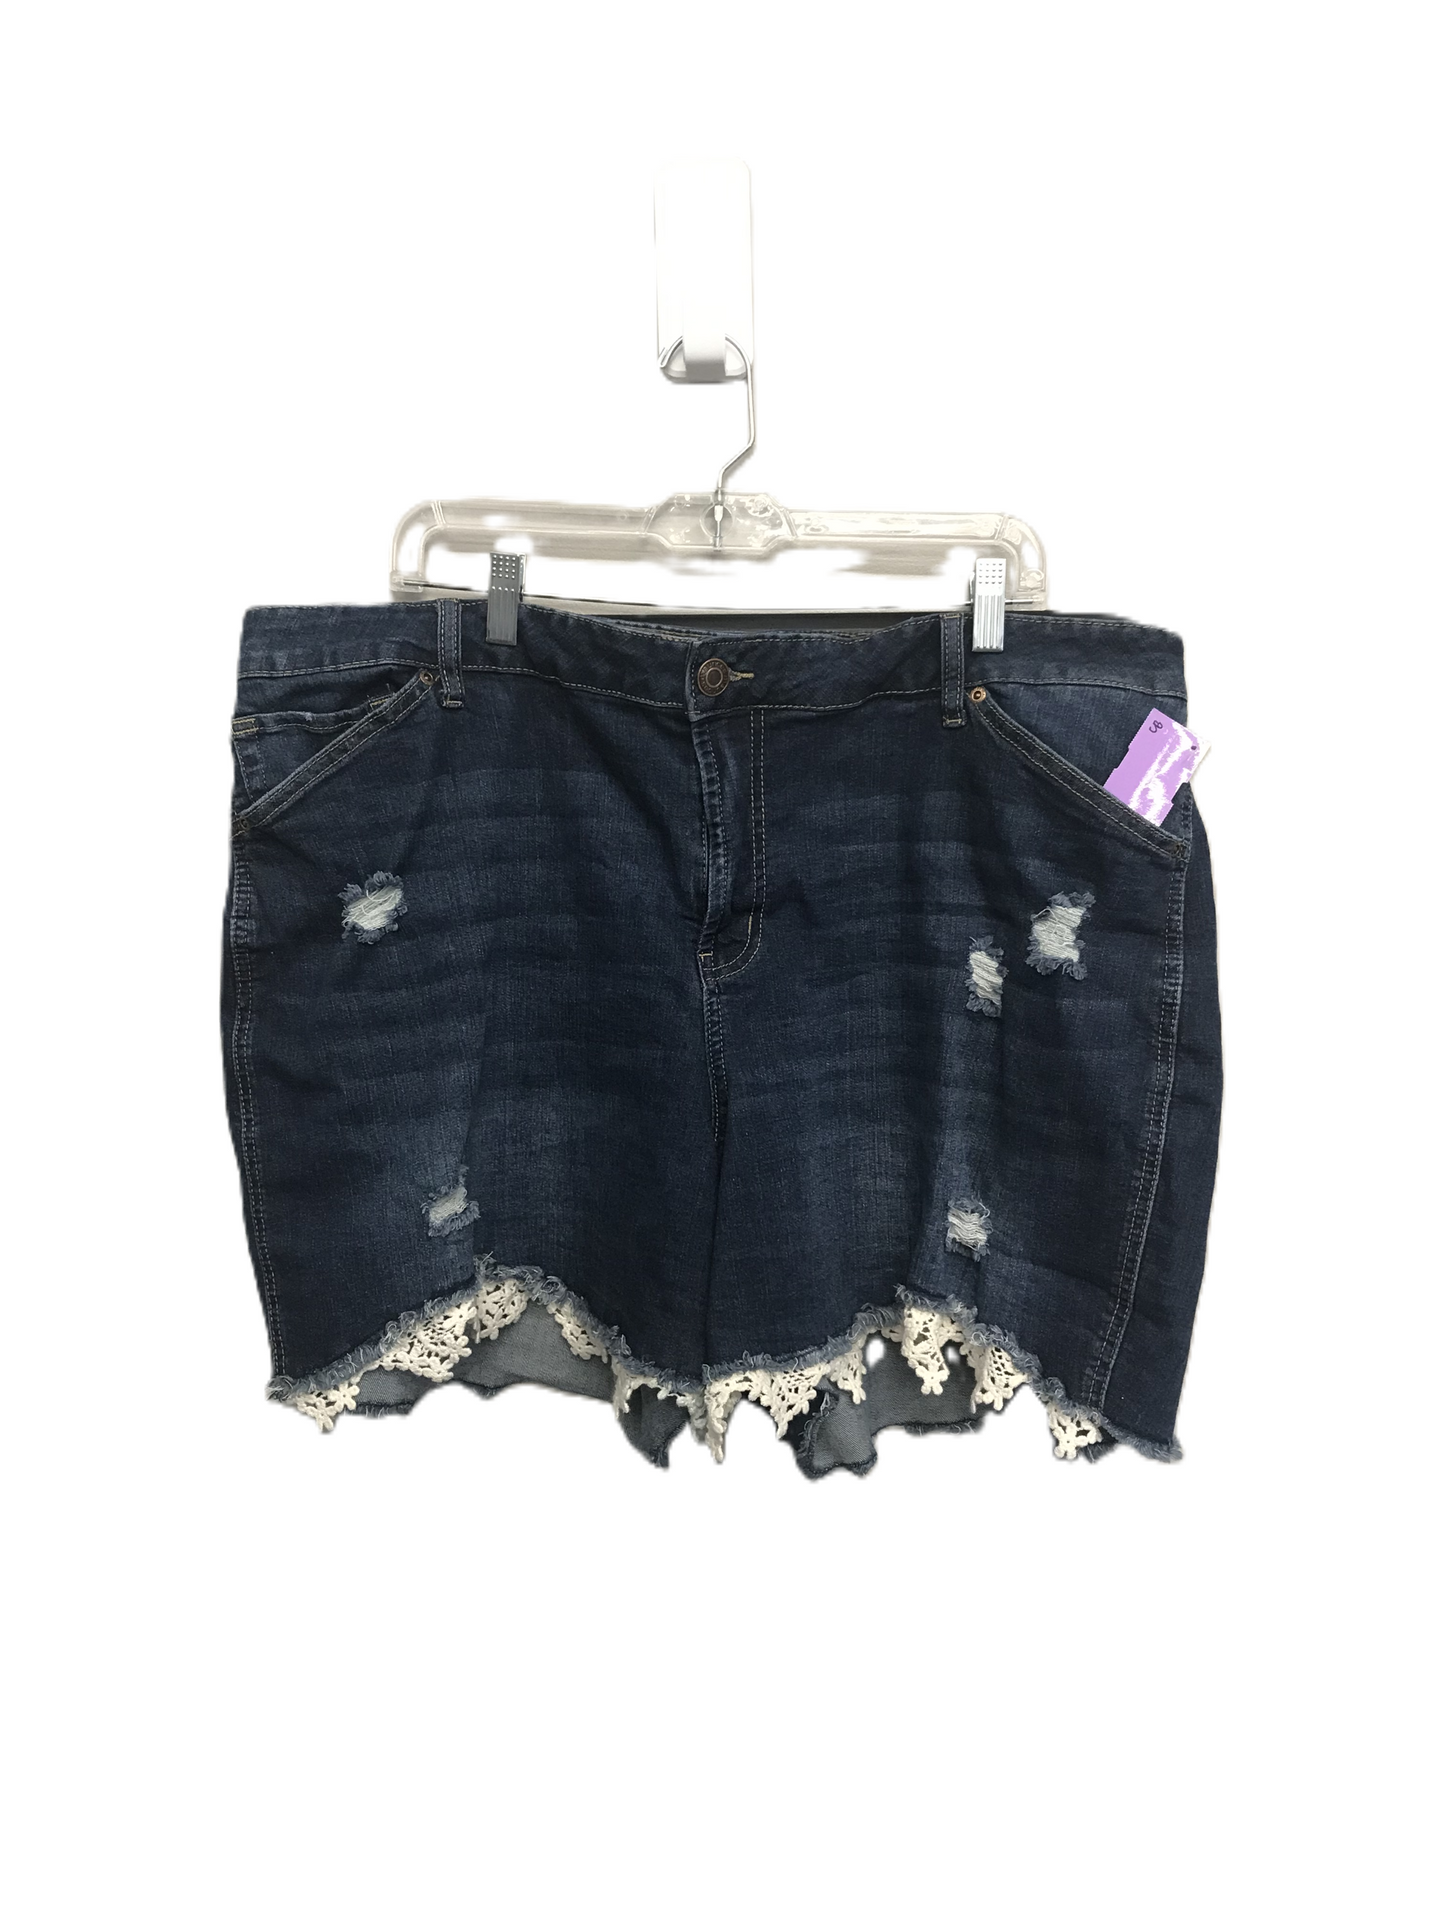 Blue Denim Shorts By Maurices, Size: 22